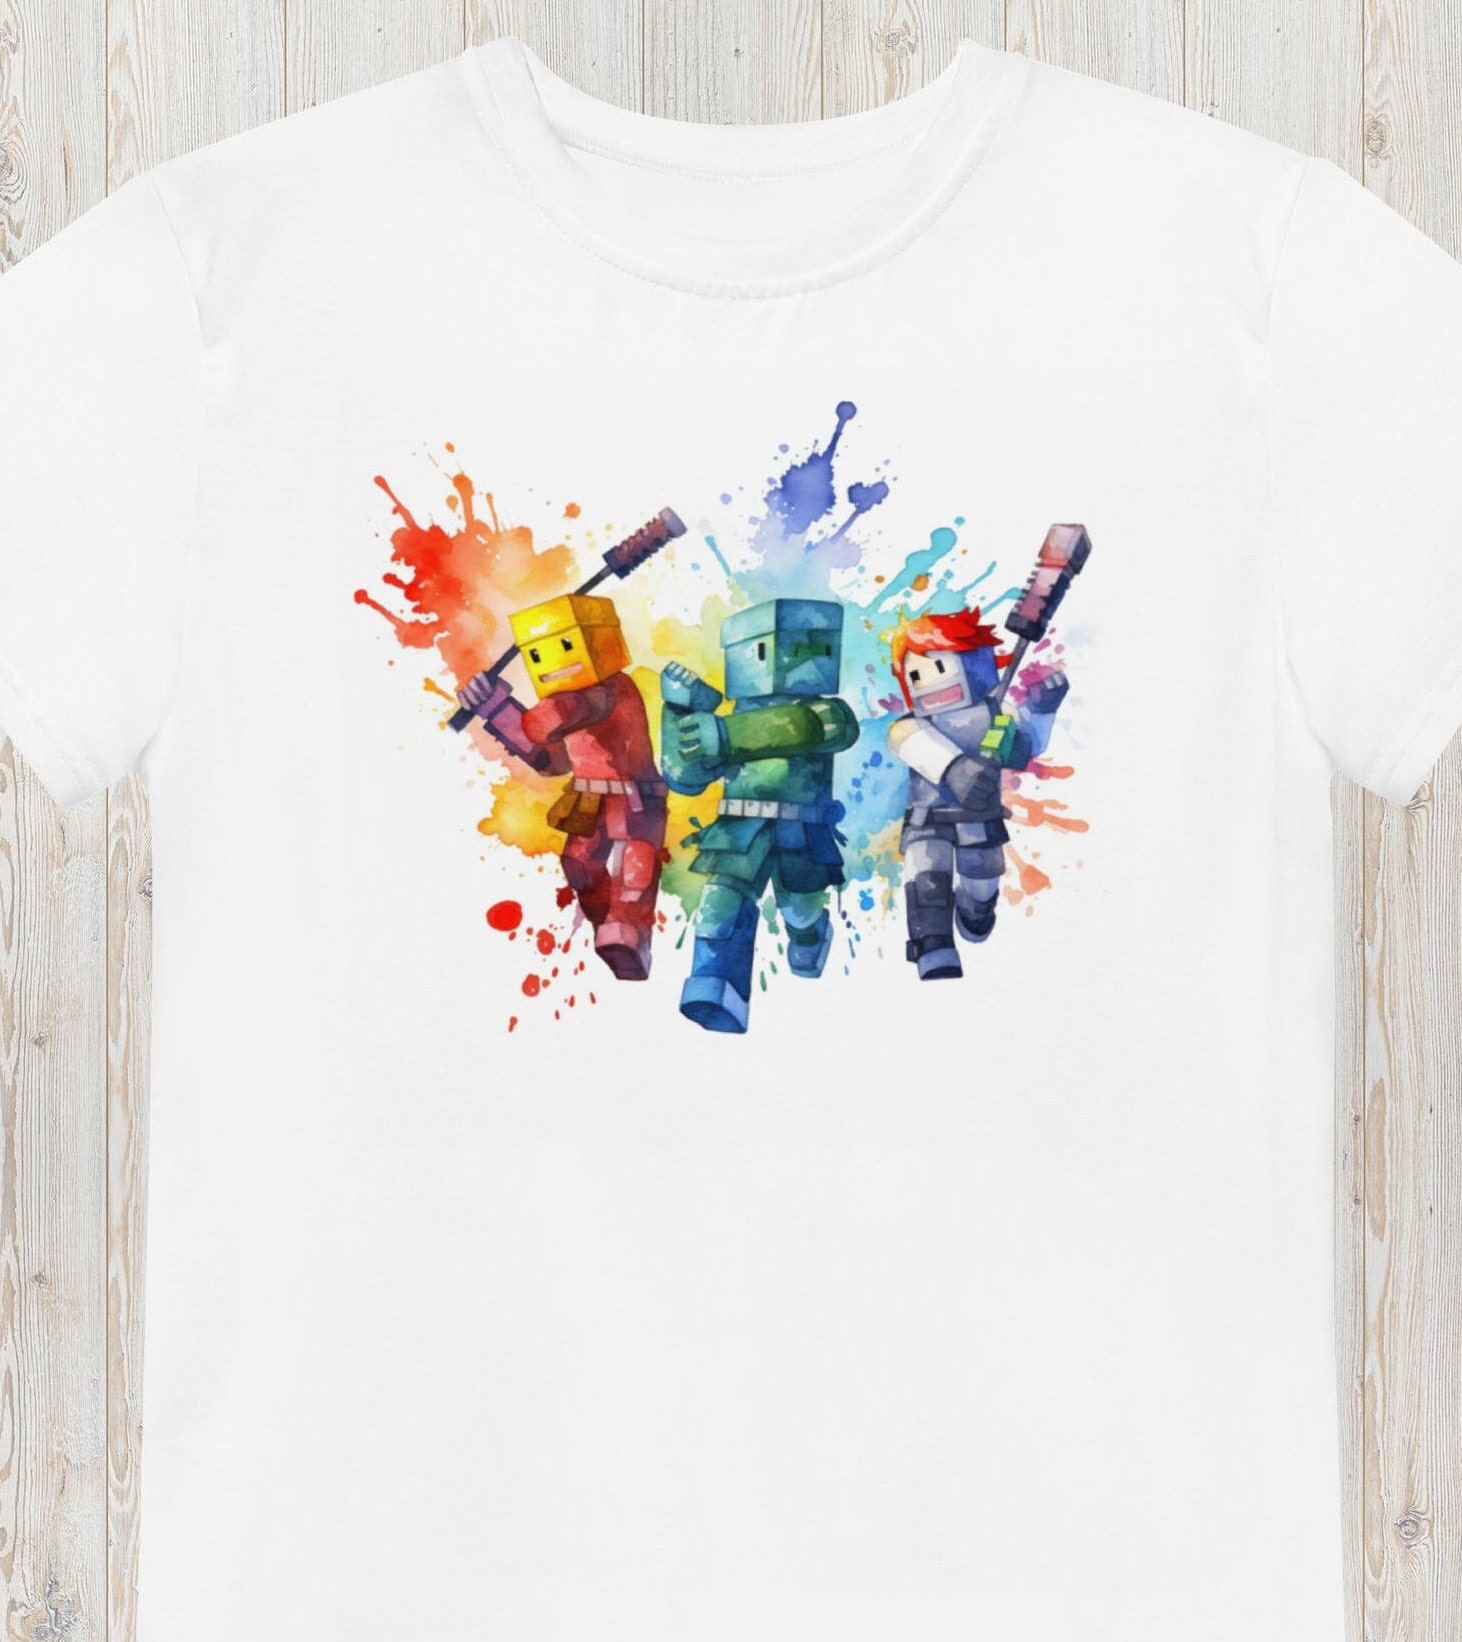 Bzdaisy ROBLOX T-Shirt - Perfect for Gaming Fans - Cool Design and